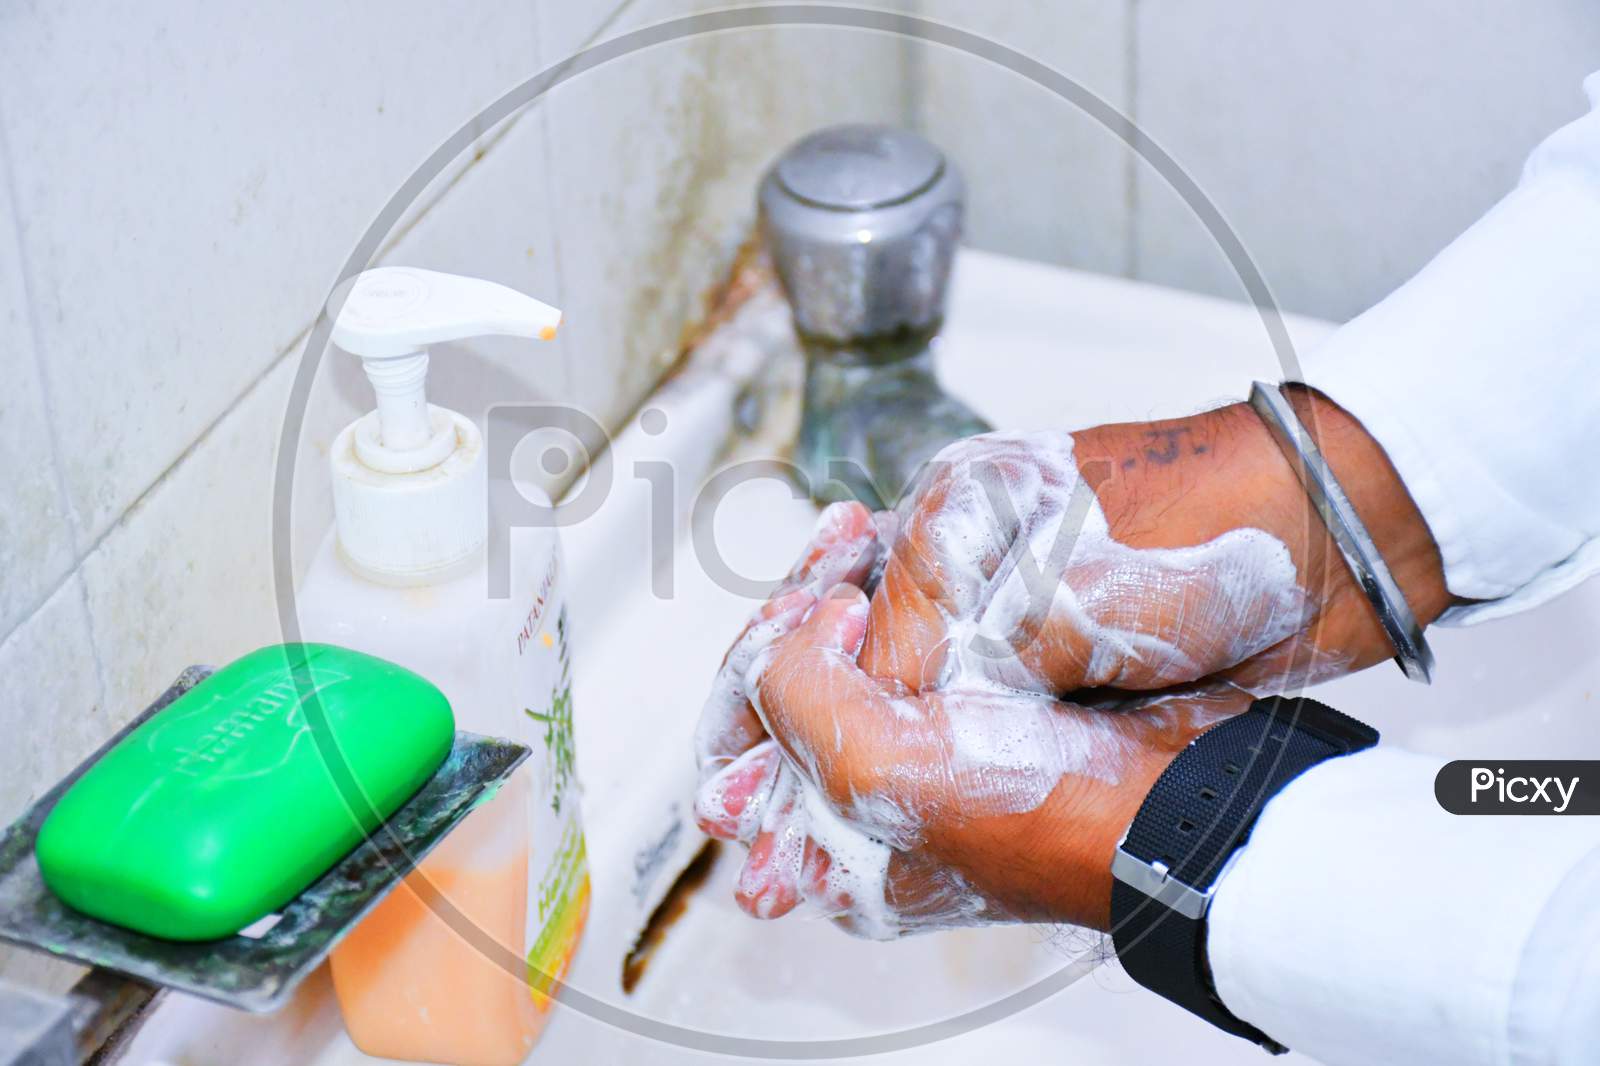 Washing hands rubbing with soap man for corona virus prevention, hygiene to stop spreading coronavirus. India